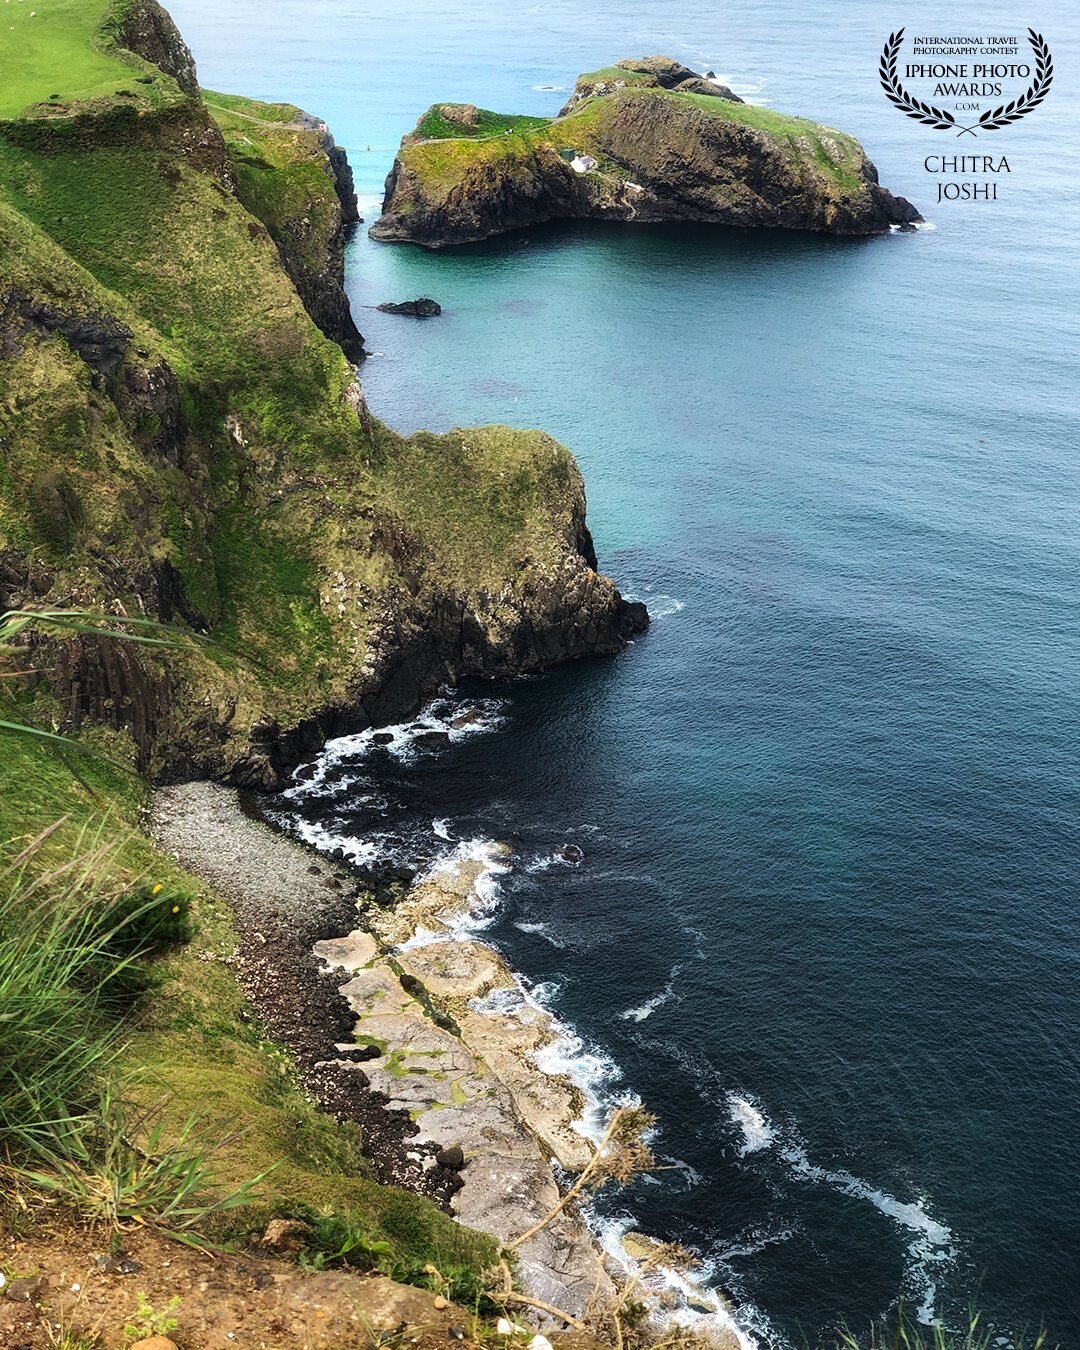 Location: Discovery Point, Northern Ireland, UK. This photo captures the National Trust" Carrick-a-Rede" rope bridge. It spans 20 metres (66 ft) and is 30 metres (98 ft) above the rocks/ocean below. It is definitely for strong hearts!